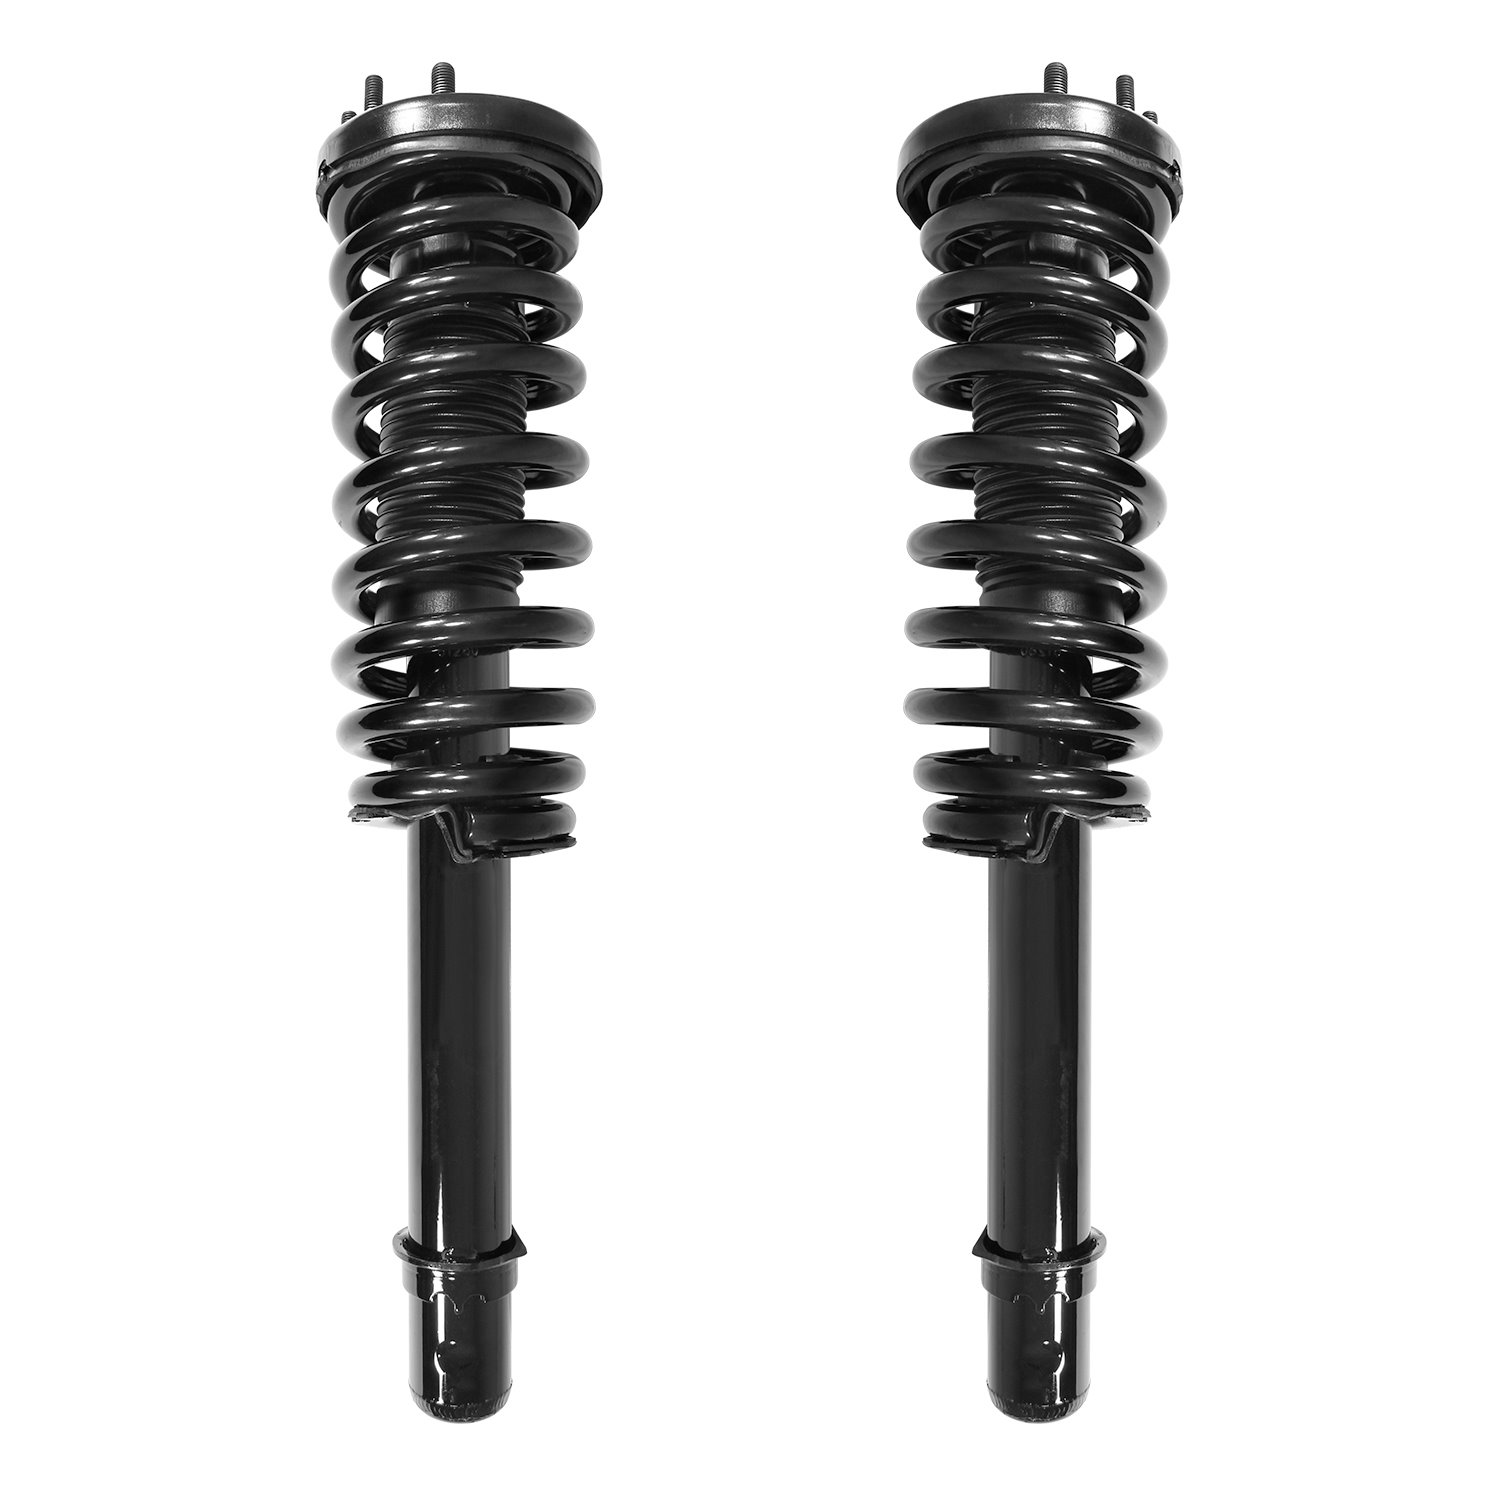 2-11871-11872-001 Suspension Strut & Coil Spring Assembly Set Fits Select Honda Accord